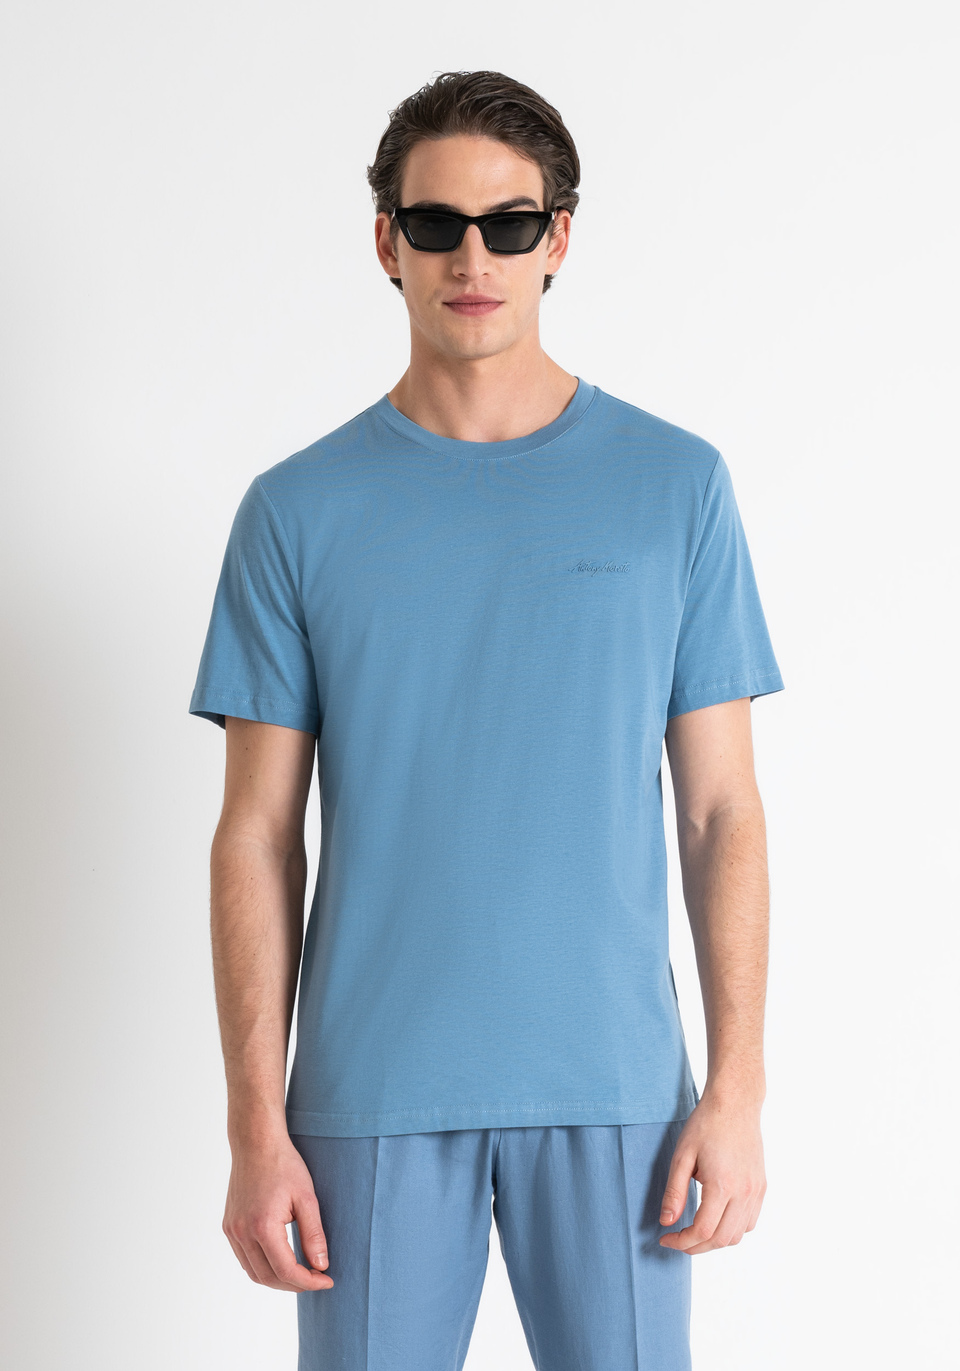 REGULAR FIT COTTON VISCOSE T-SHIRT WITH INJECTION-MOLDED RUBBERIZED LOGO PRINT - Antony Morato Online Shop